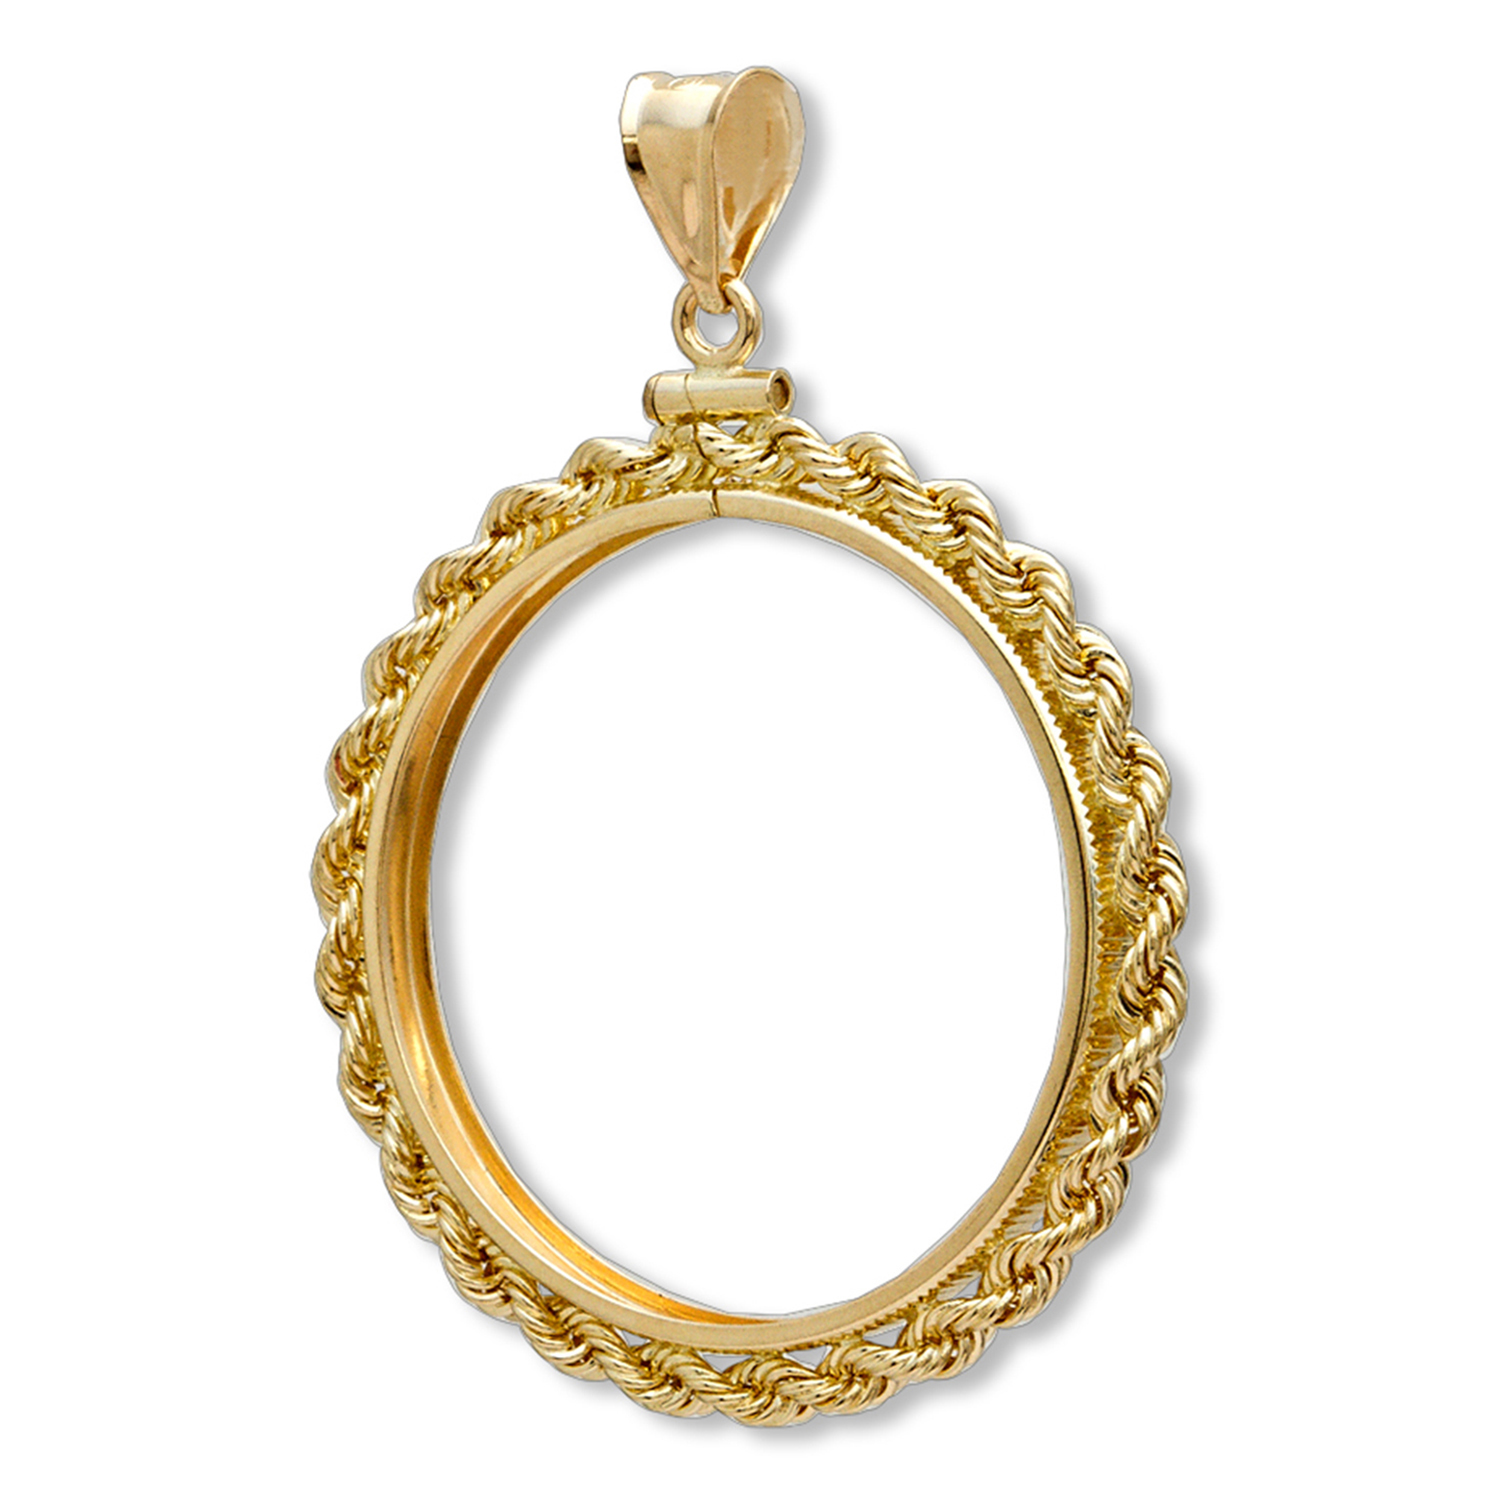 Buy 14K Gold Screw-Top Rope Polished Coin Bezel - 21.5 mm